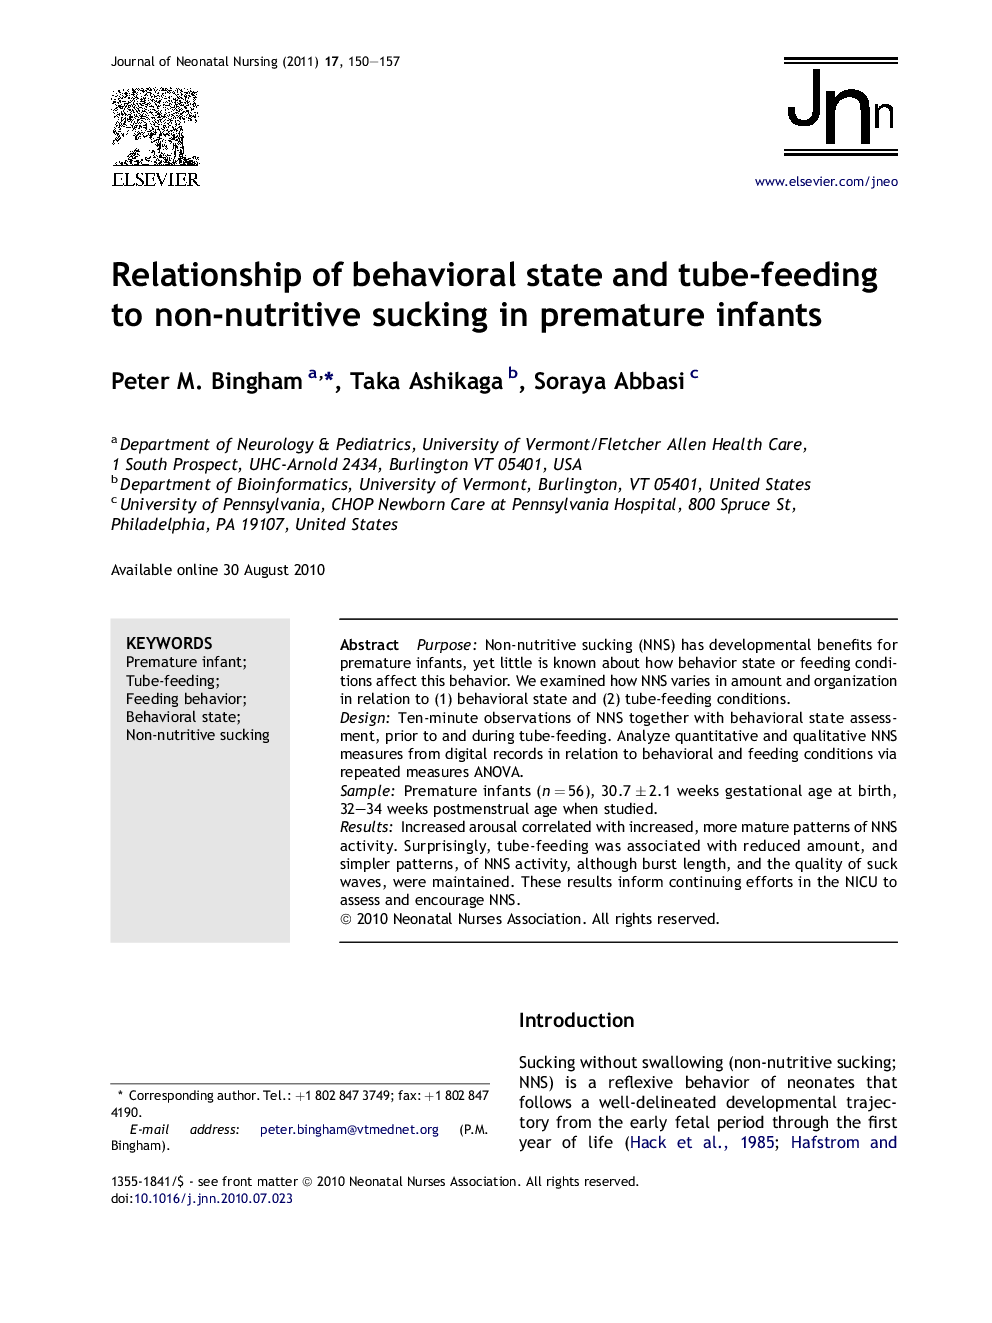 Relationship of behavioral state and tube-feeding to non-nutritive sucking in premature infants